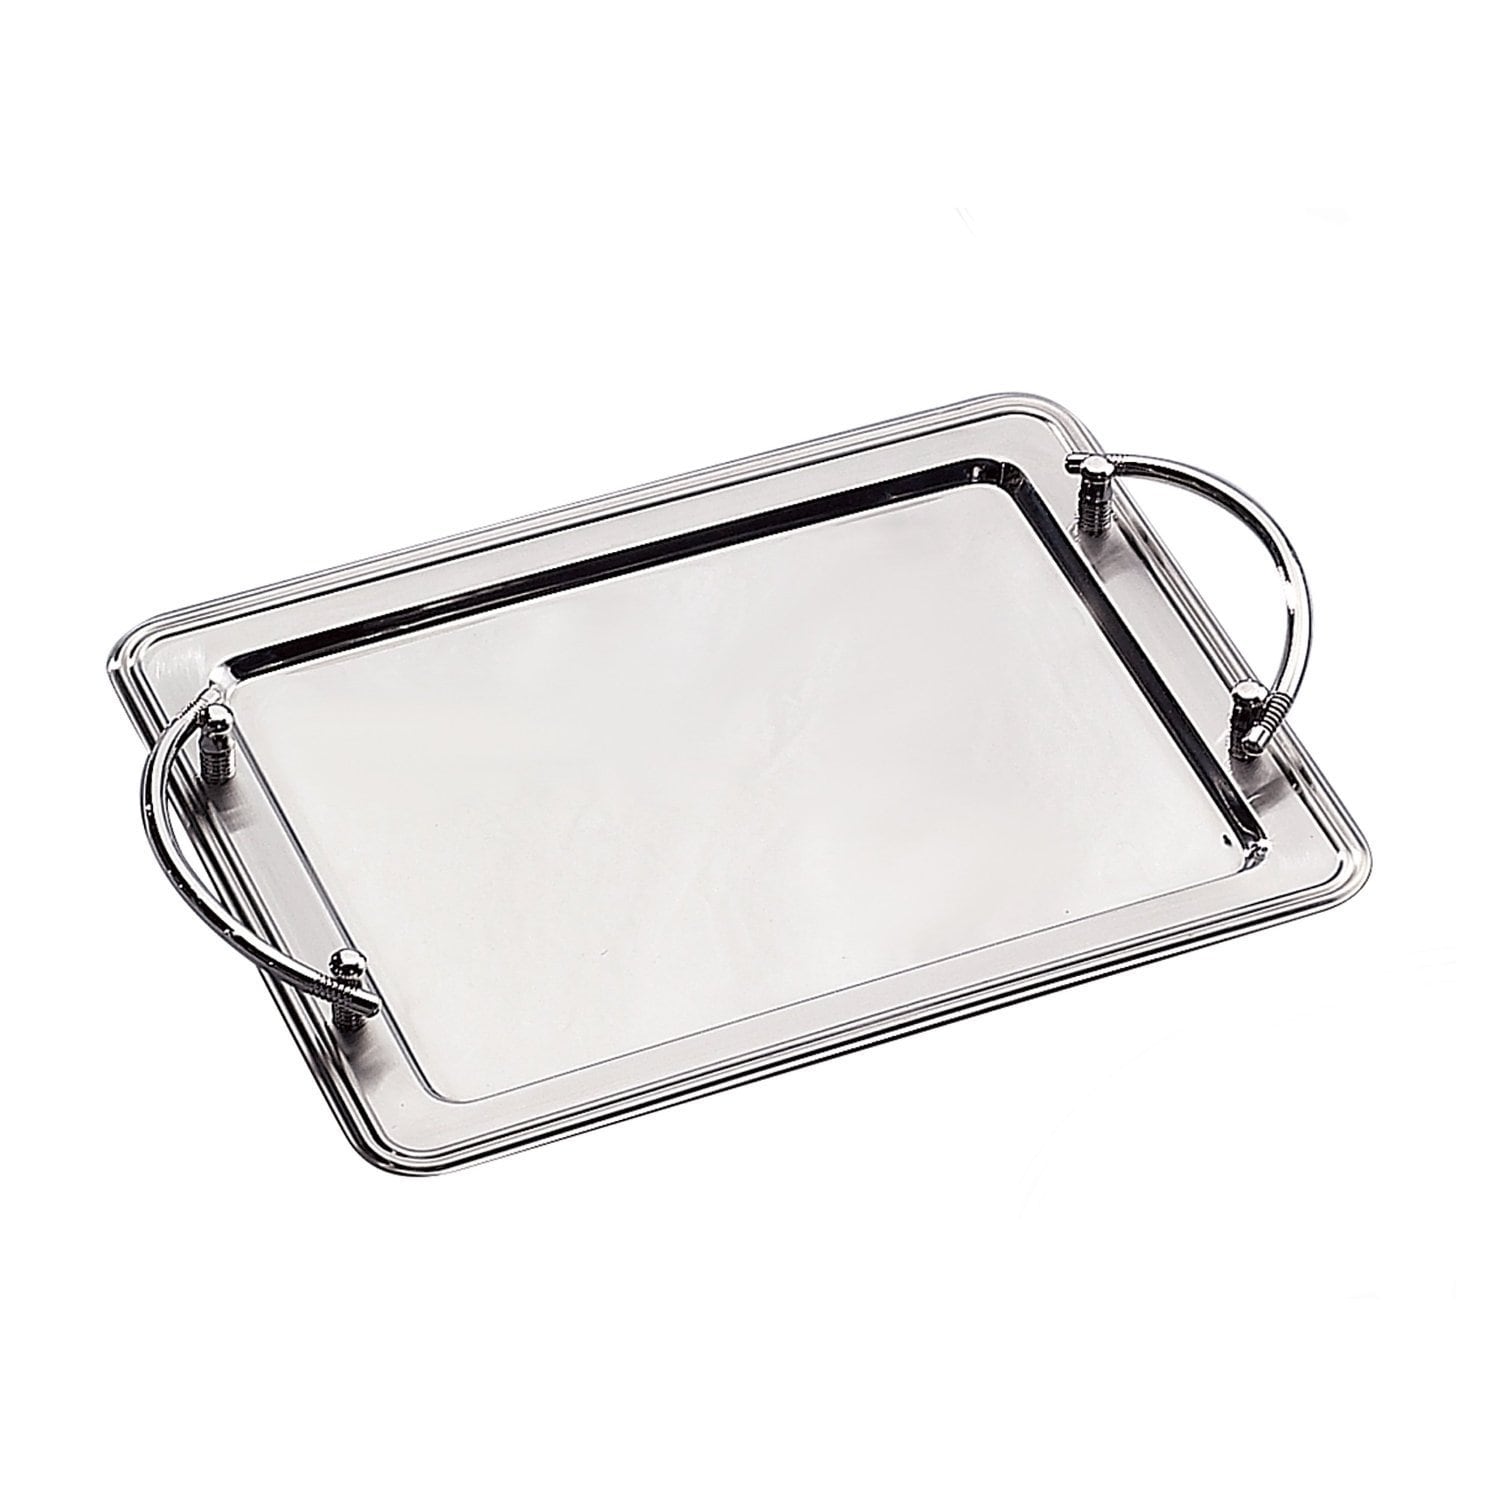 Heim Concept Stainless Steel Rectangular Tray with...